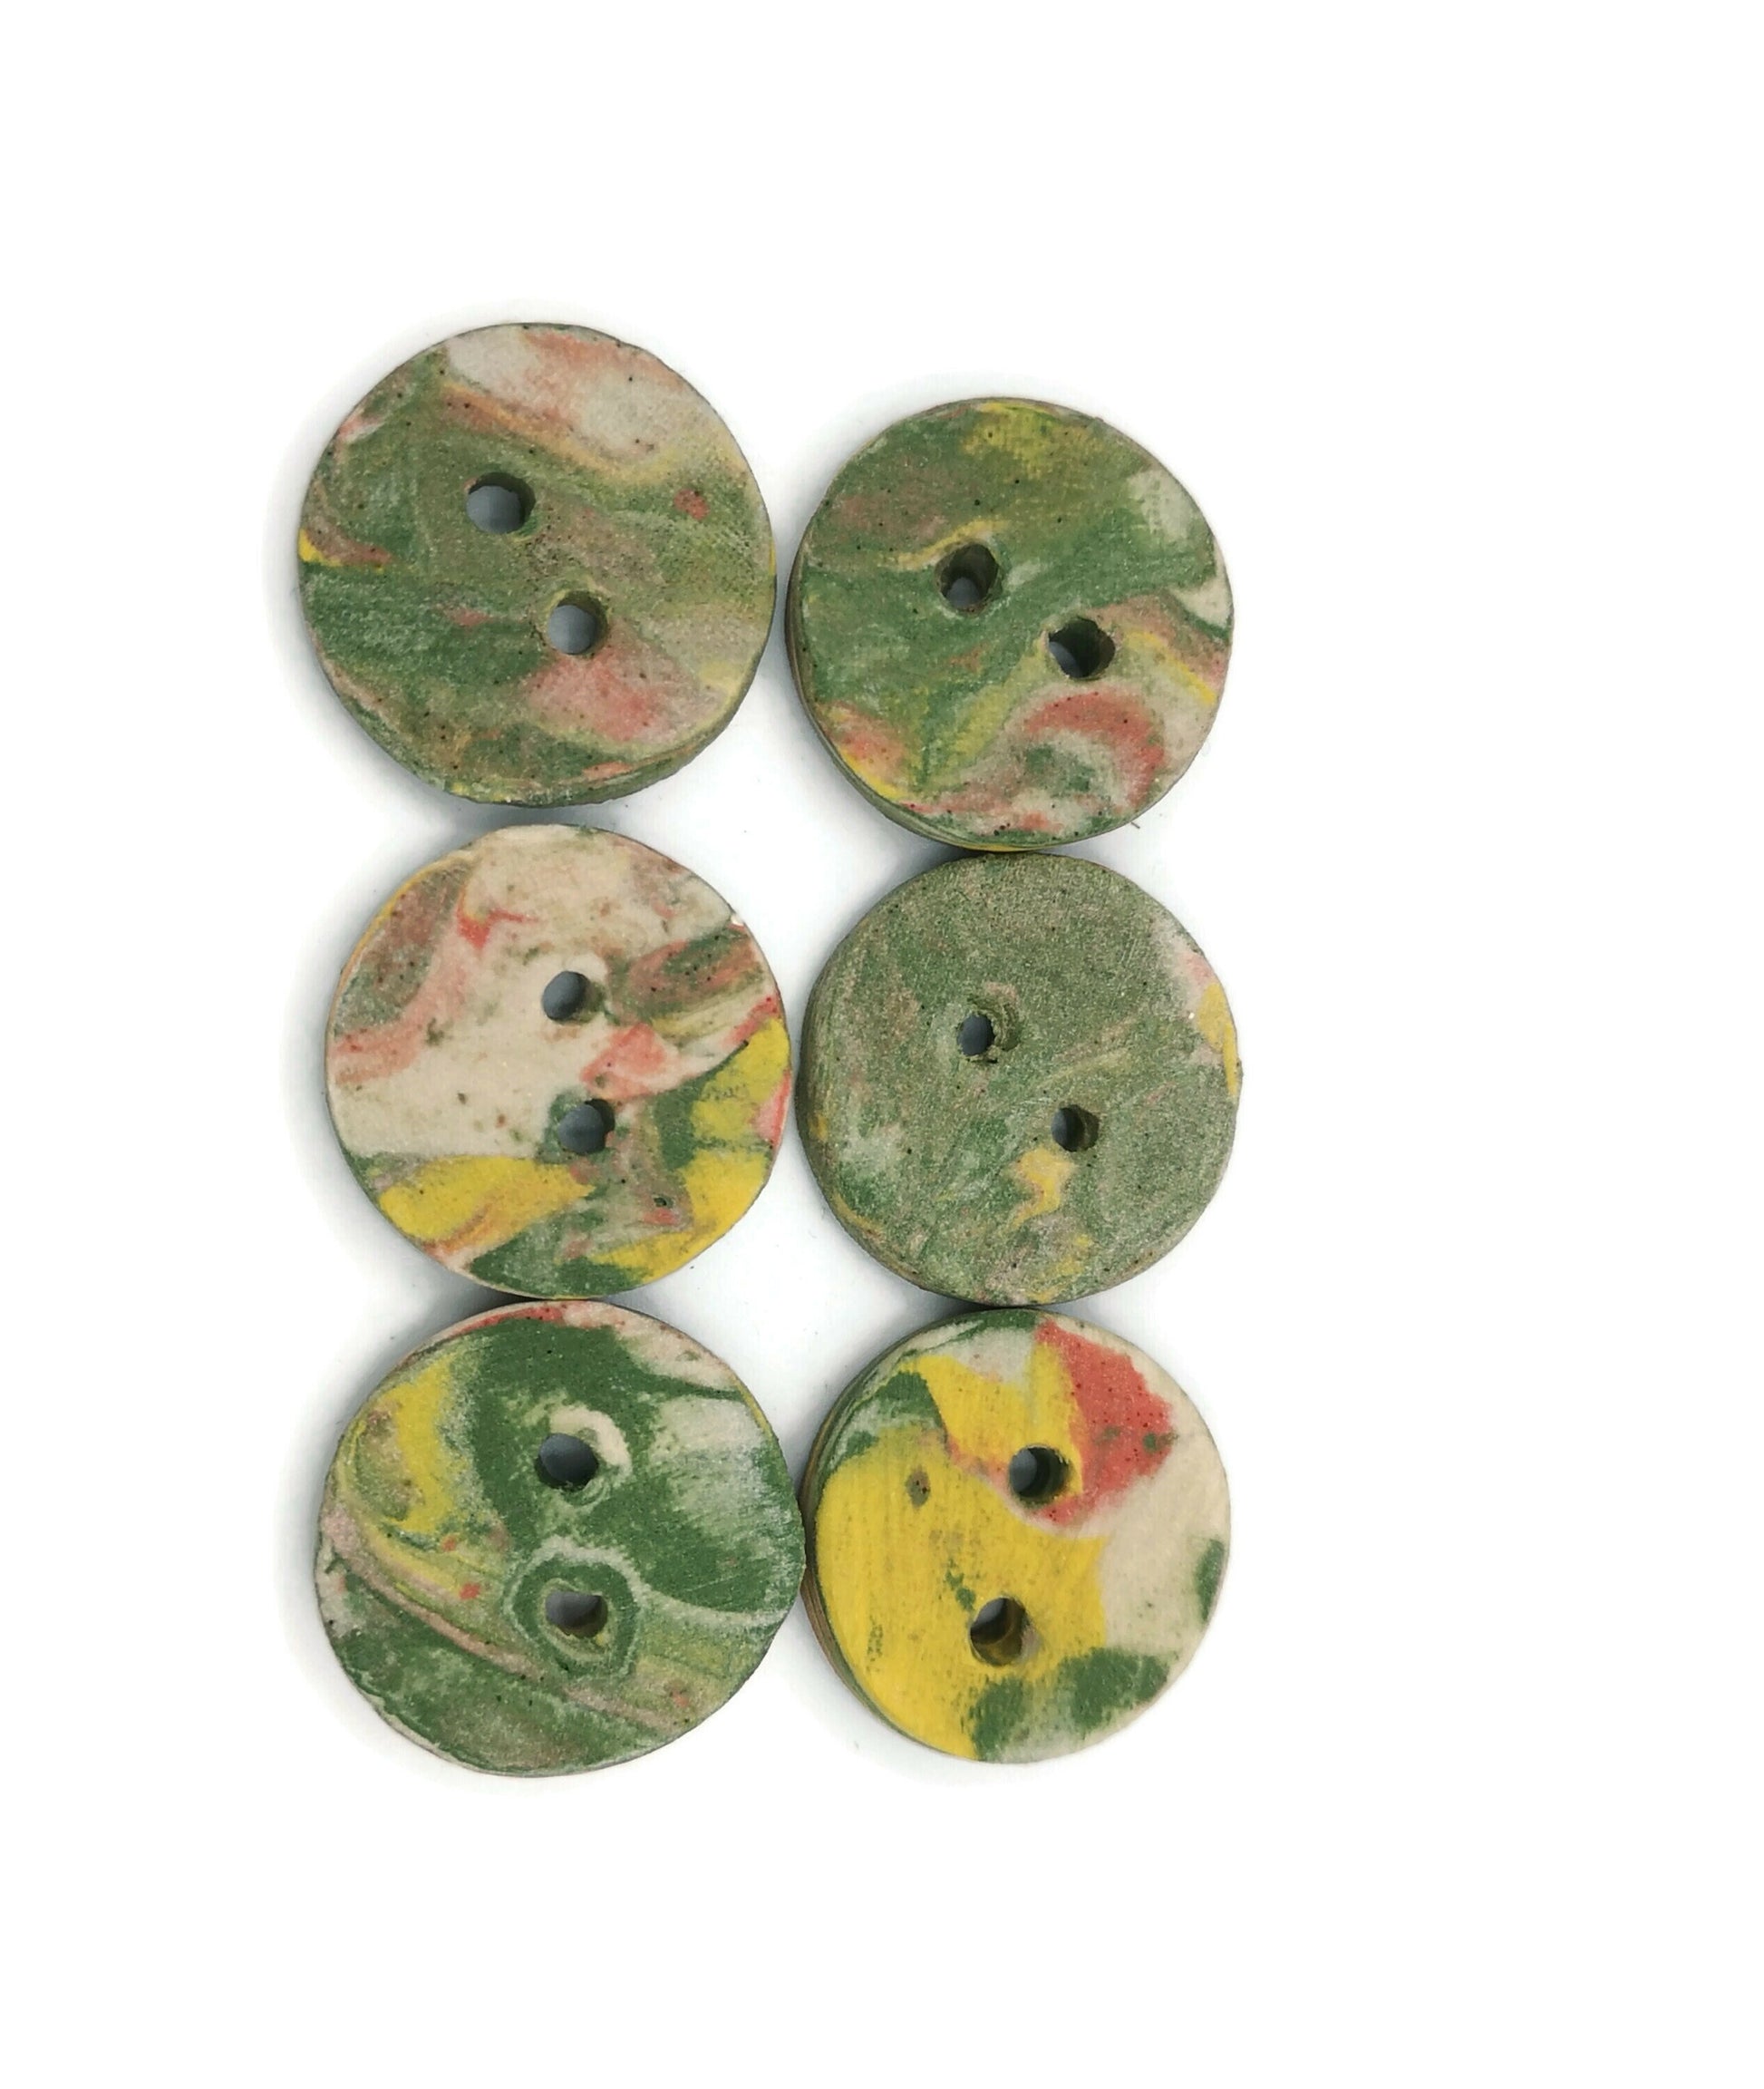 Handmade Ceramic Sewing Buttons Lot Of 6, Novelty Buttons For Crafts, Best Sellers Custom Buttons, Unique Backpack Buttons Cute, Coat Button - Ceramica Ana Rafael